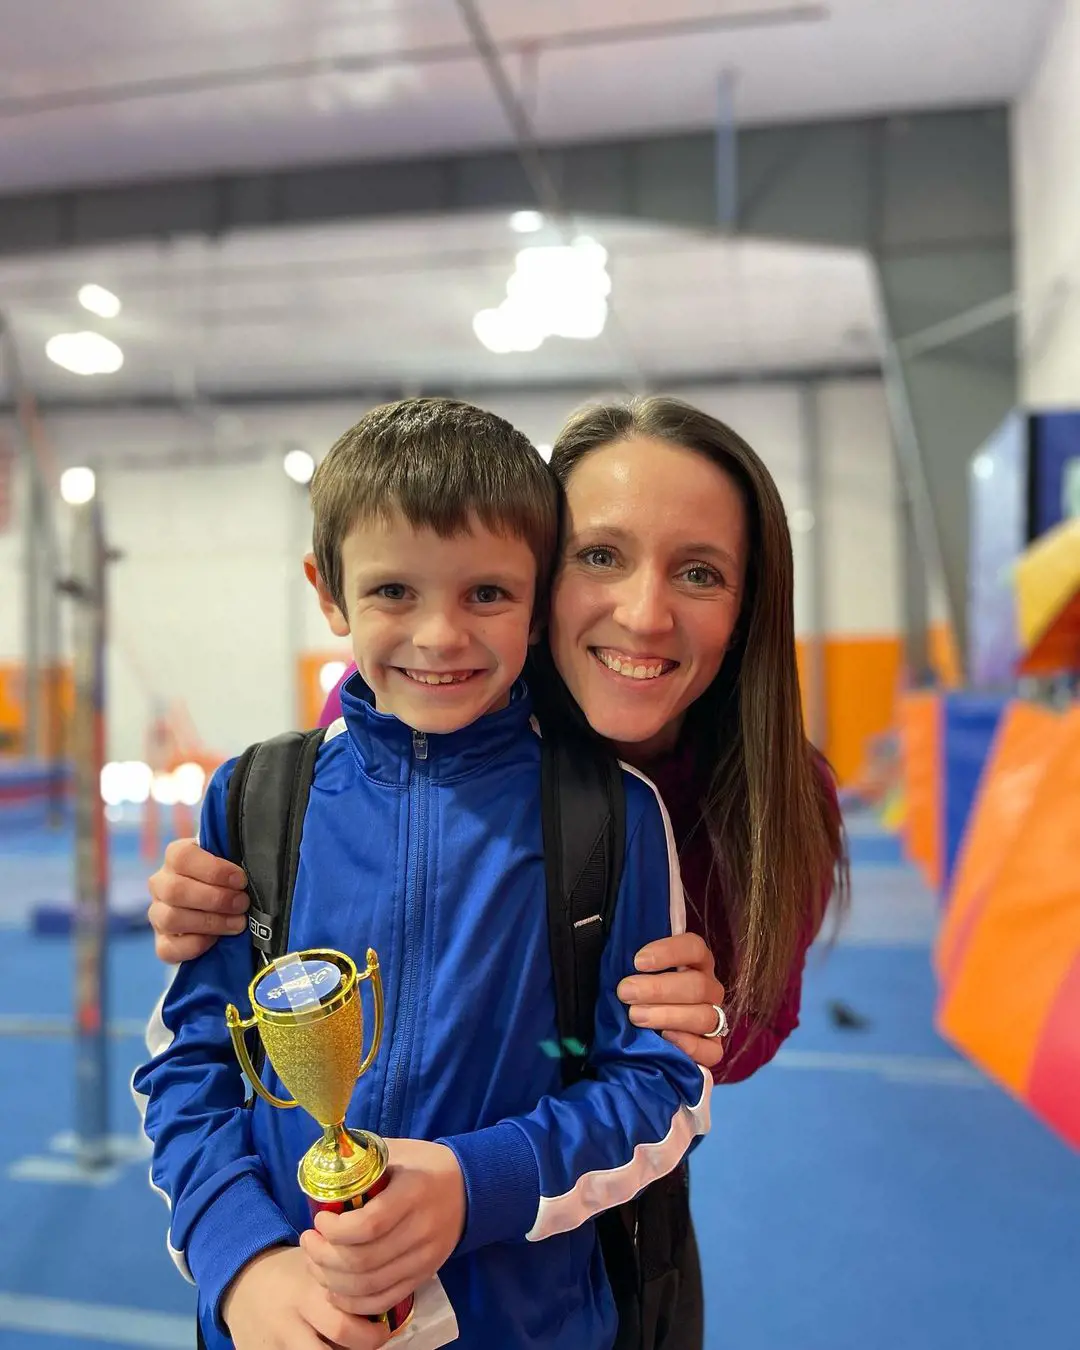 Chellsie smiled the proudest when her son won his first competition on December 12, 2022.